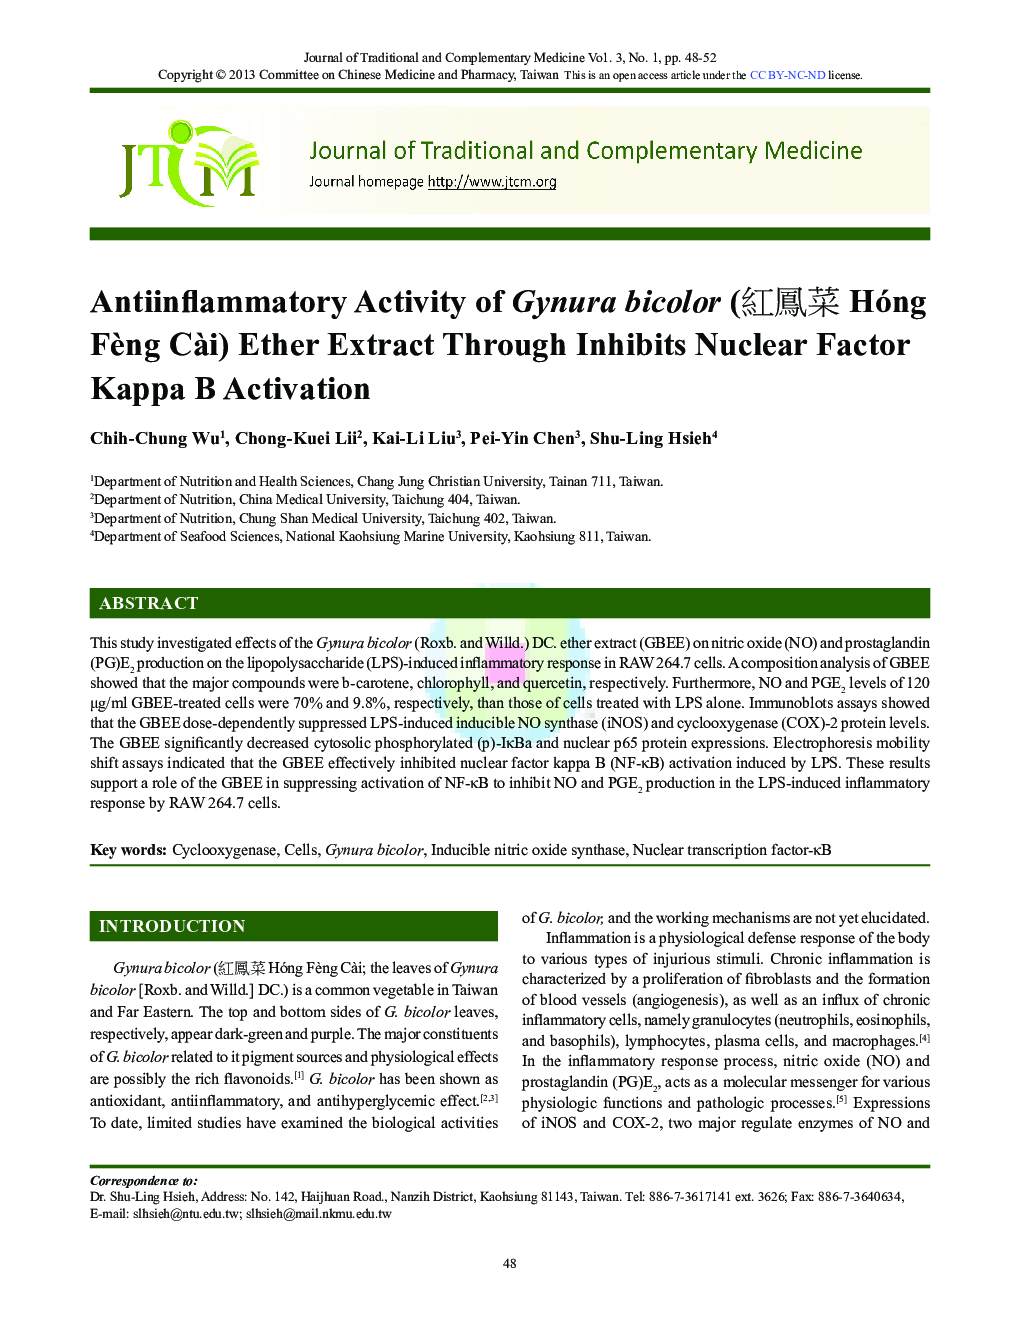 Antiinflammatory Activity of Gynura bicolor (紅鳳菜 Hóng Fèng Cài) Ether Extract Through Inhibits Nuclear Factor Kappa B Activation